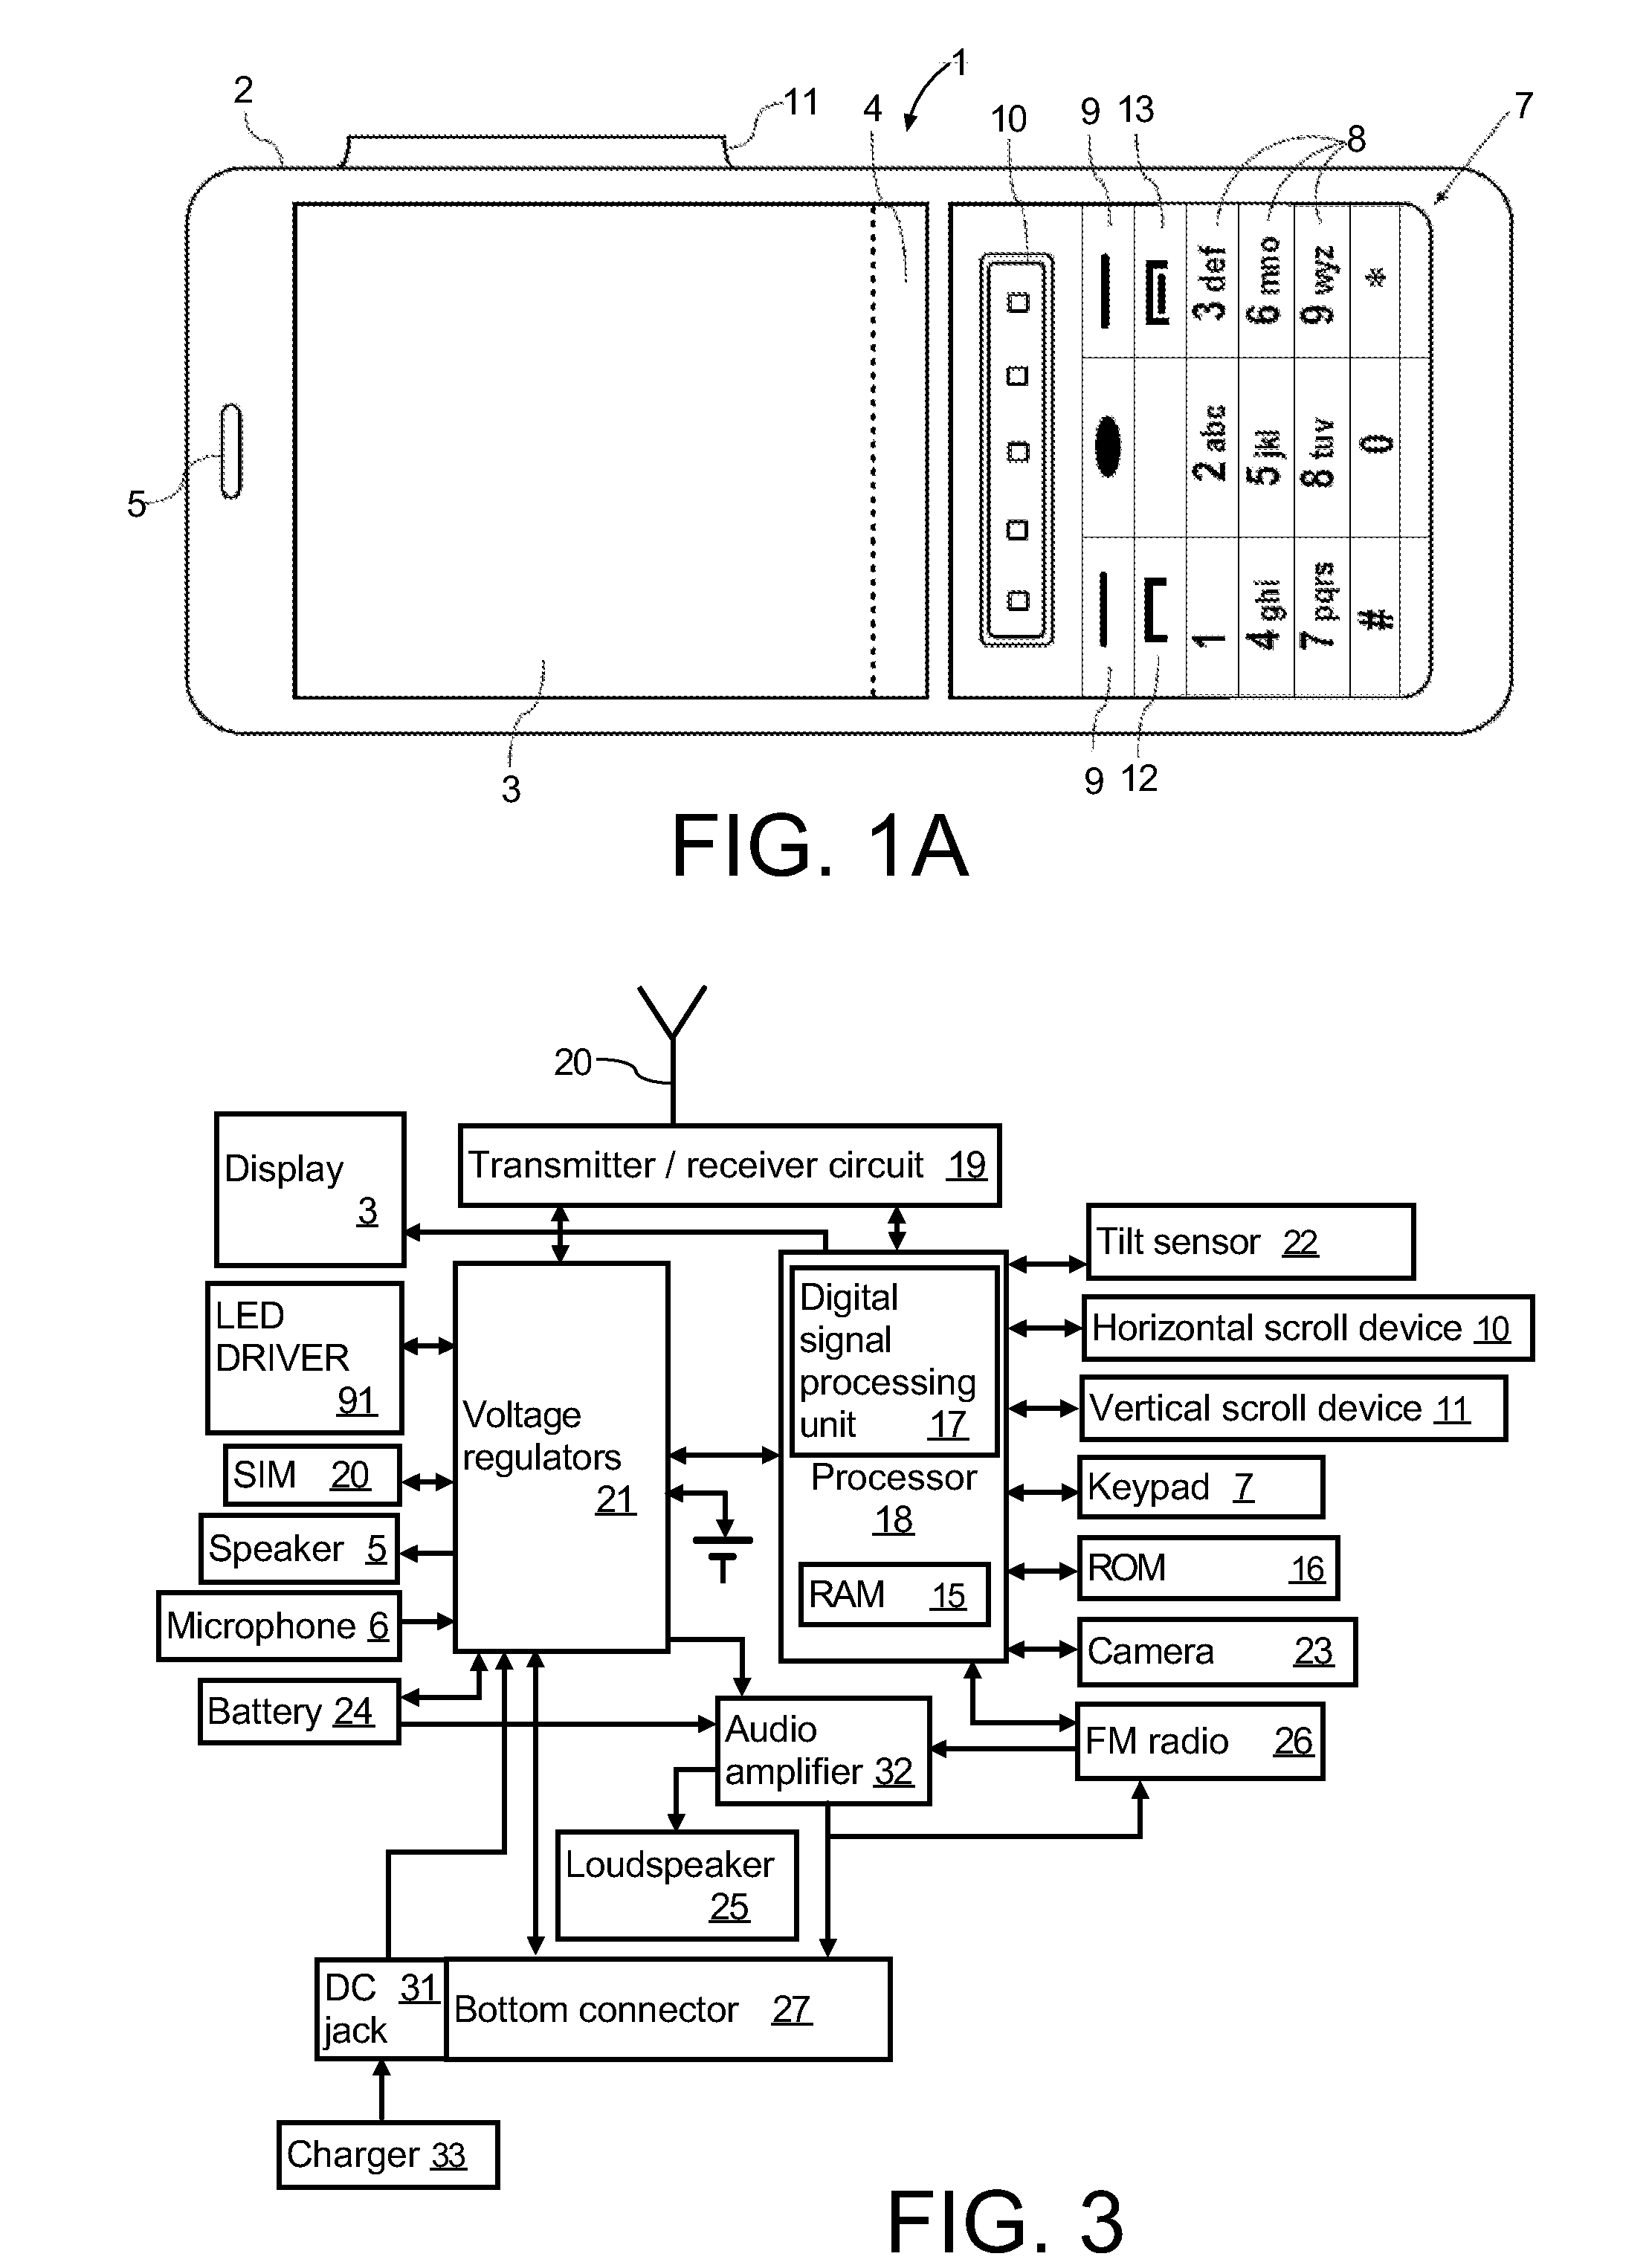 Mobile electronic device with competing input devices